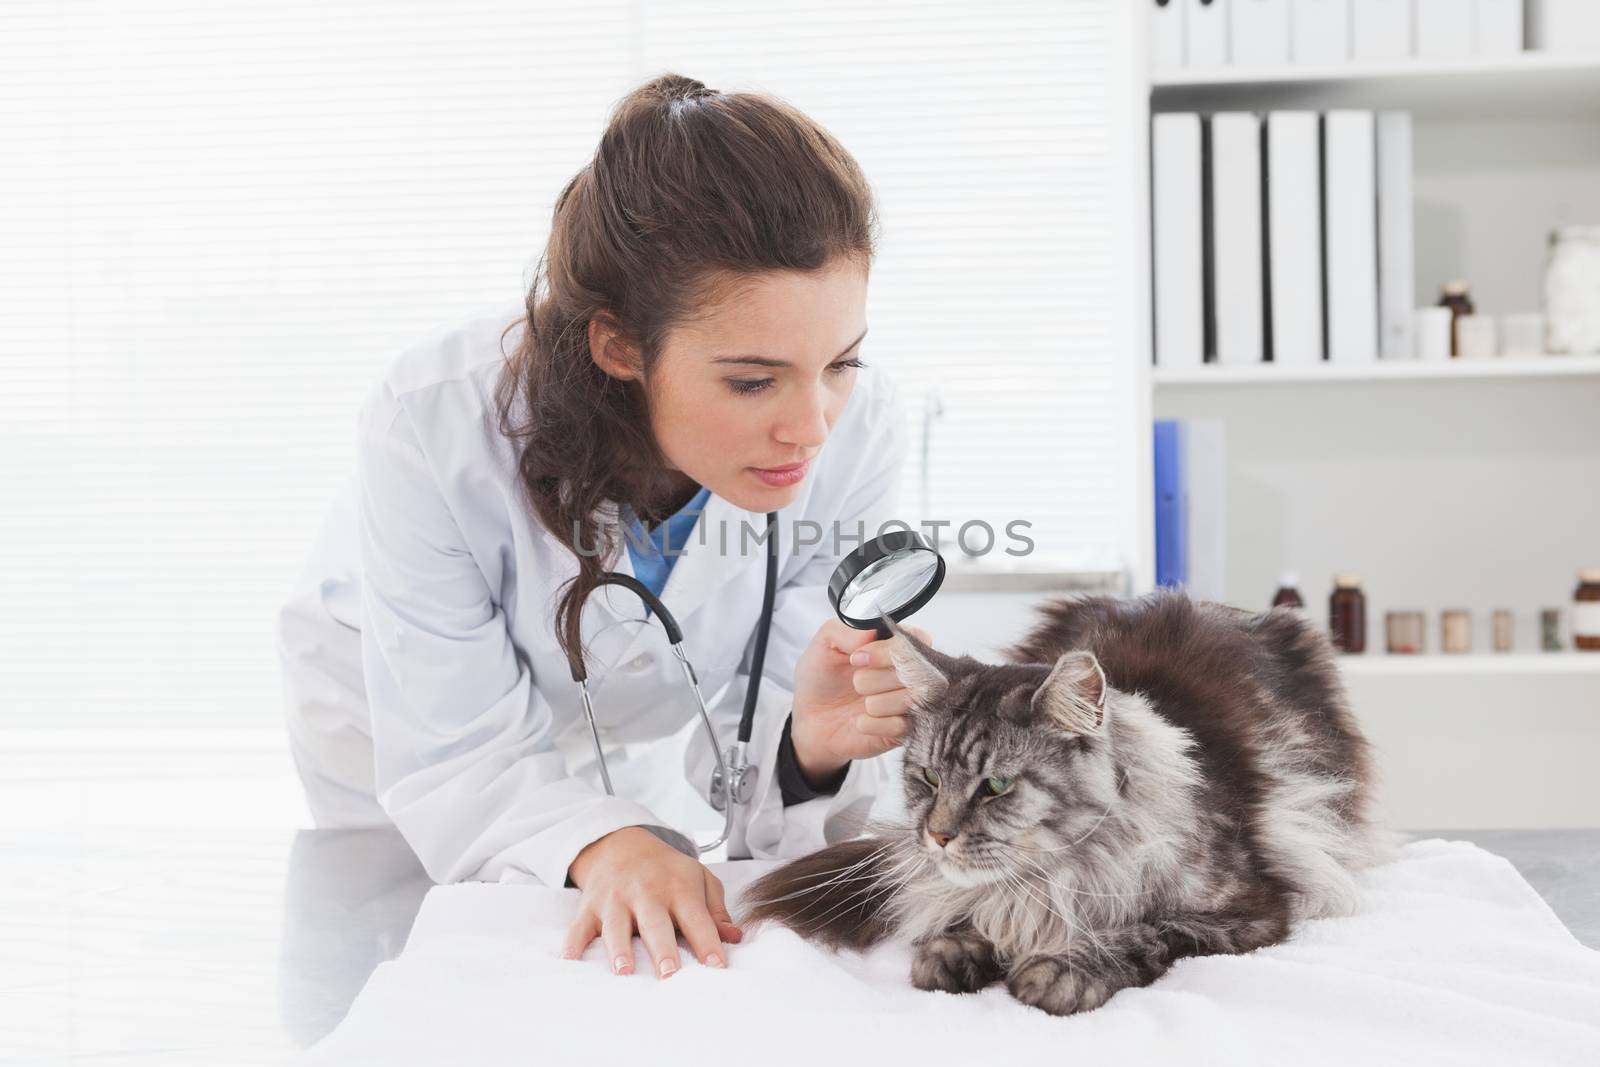 Vet examining a cat with magnifying glass by Wavebreakmedia